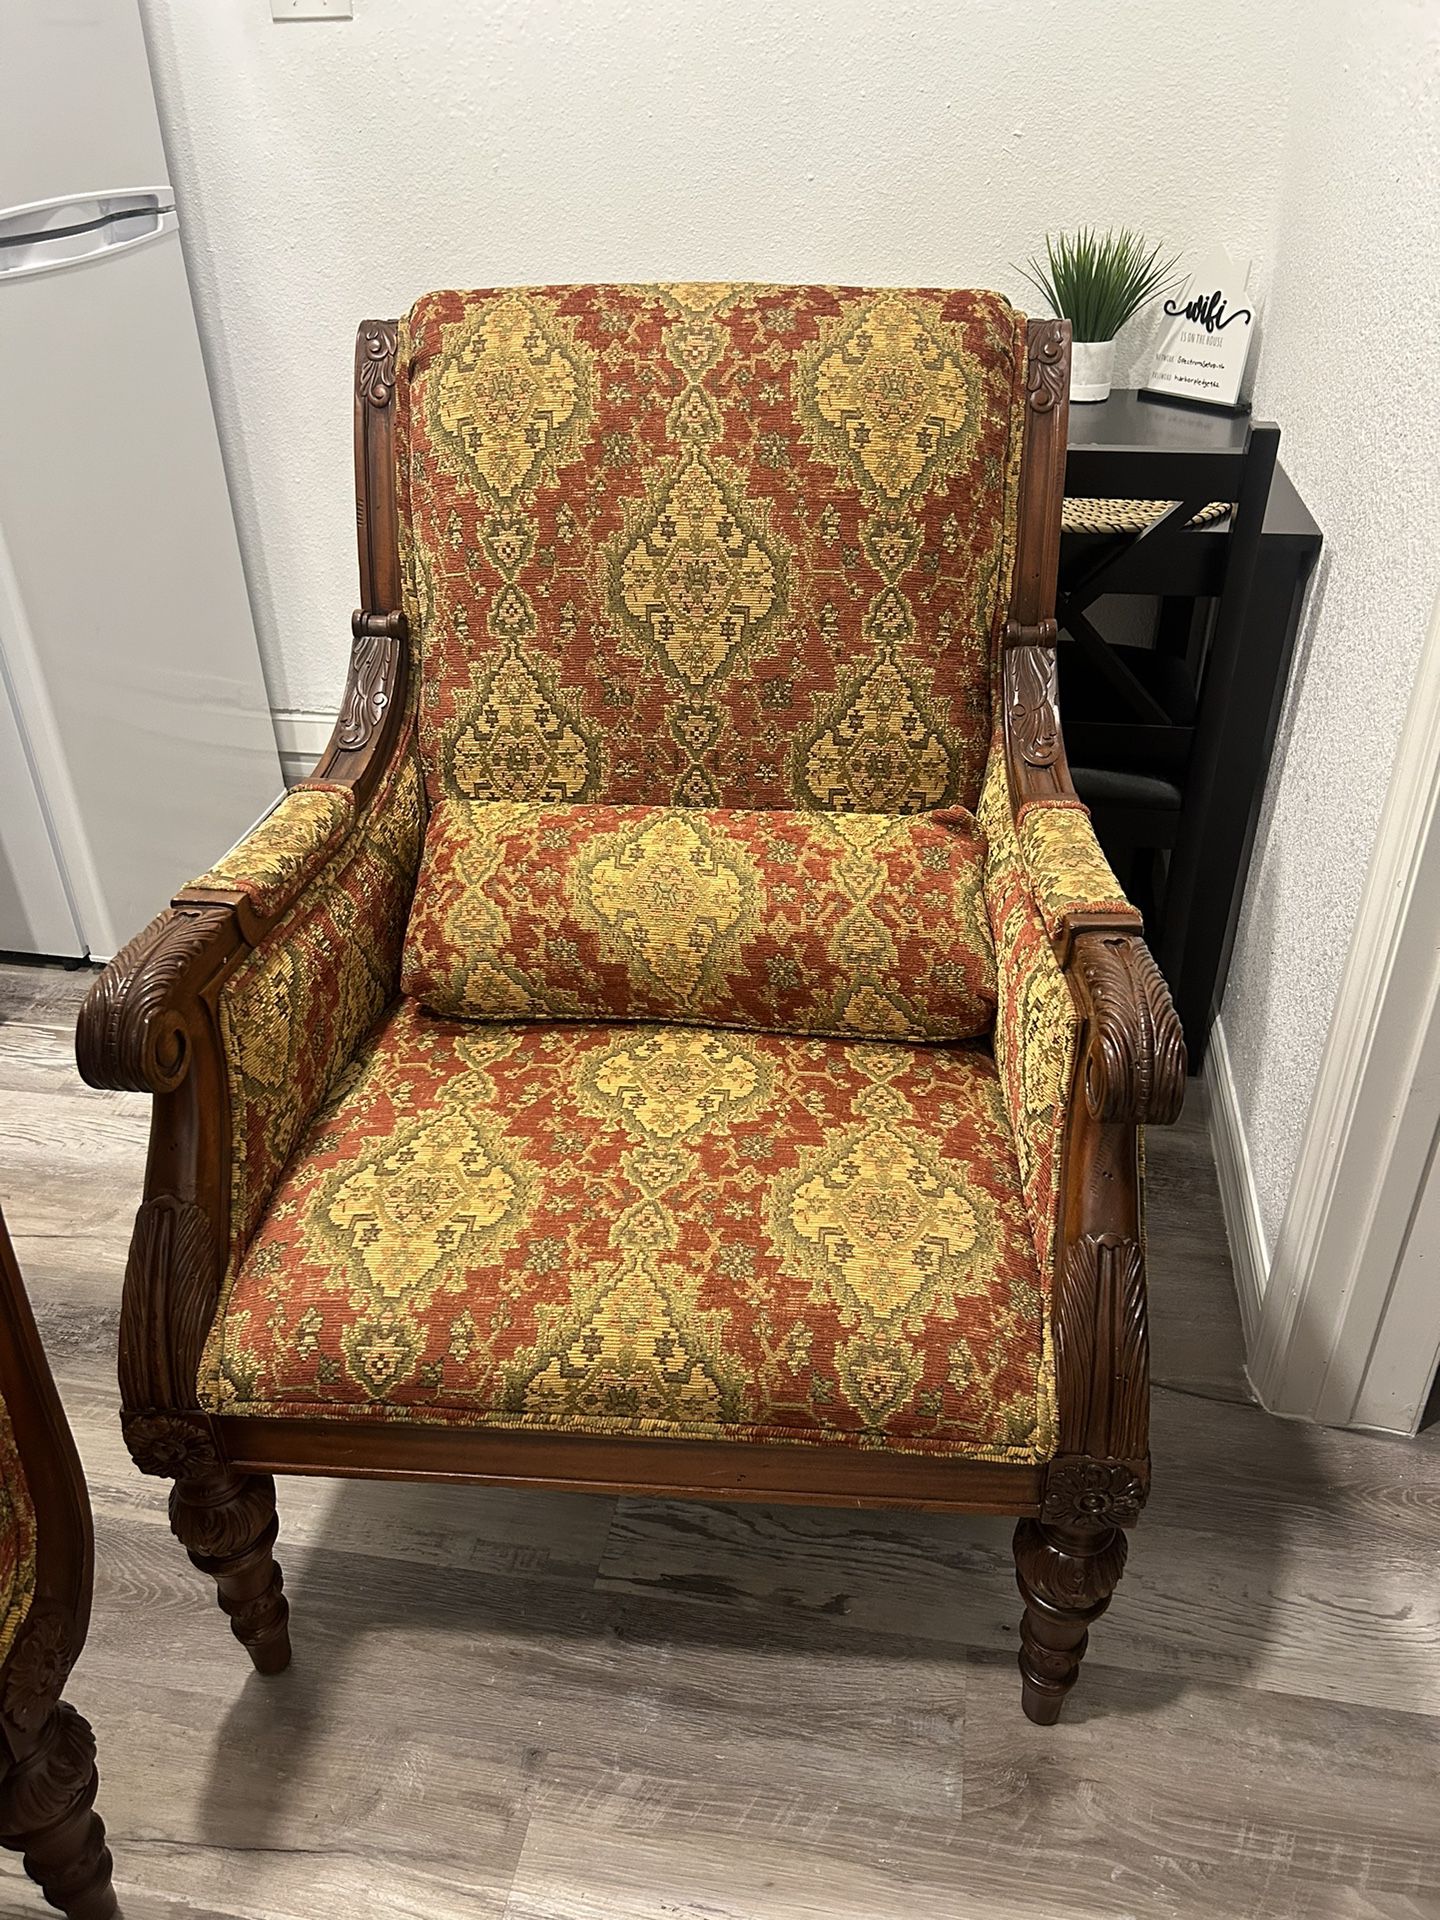 2 Antique accent chairs